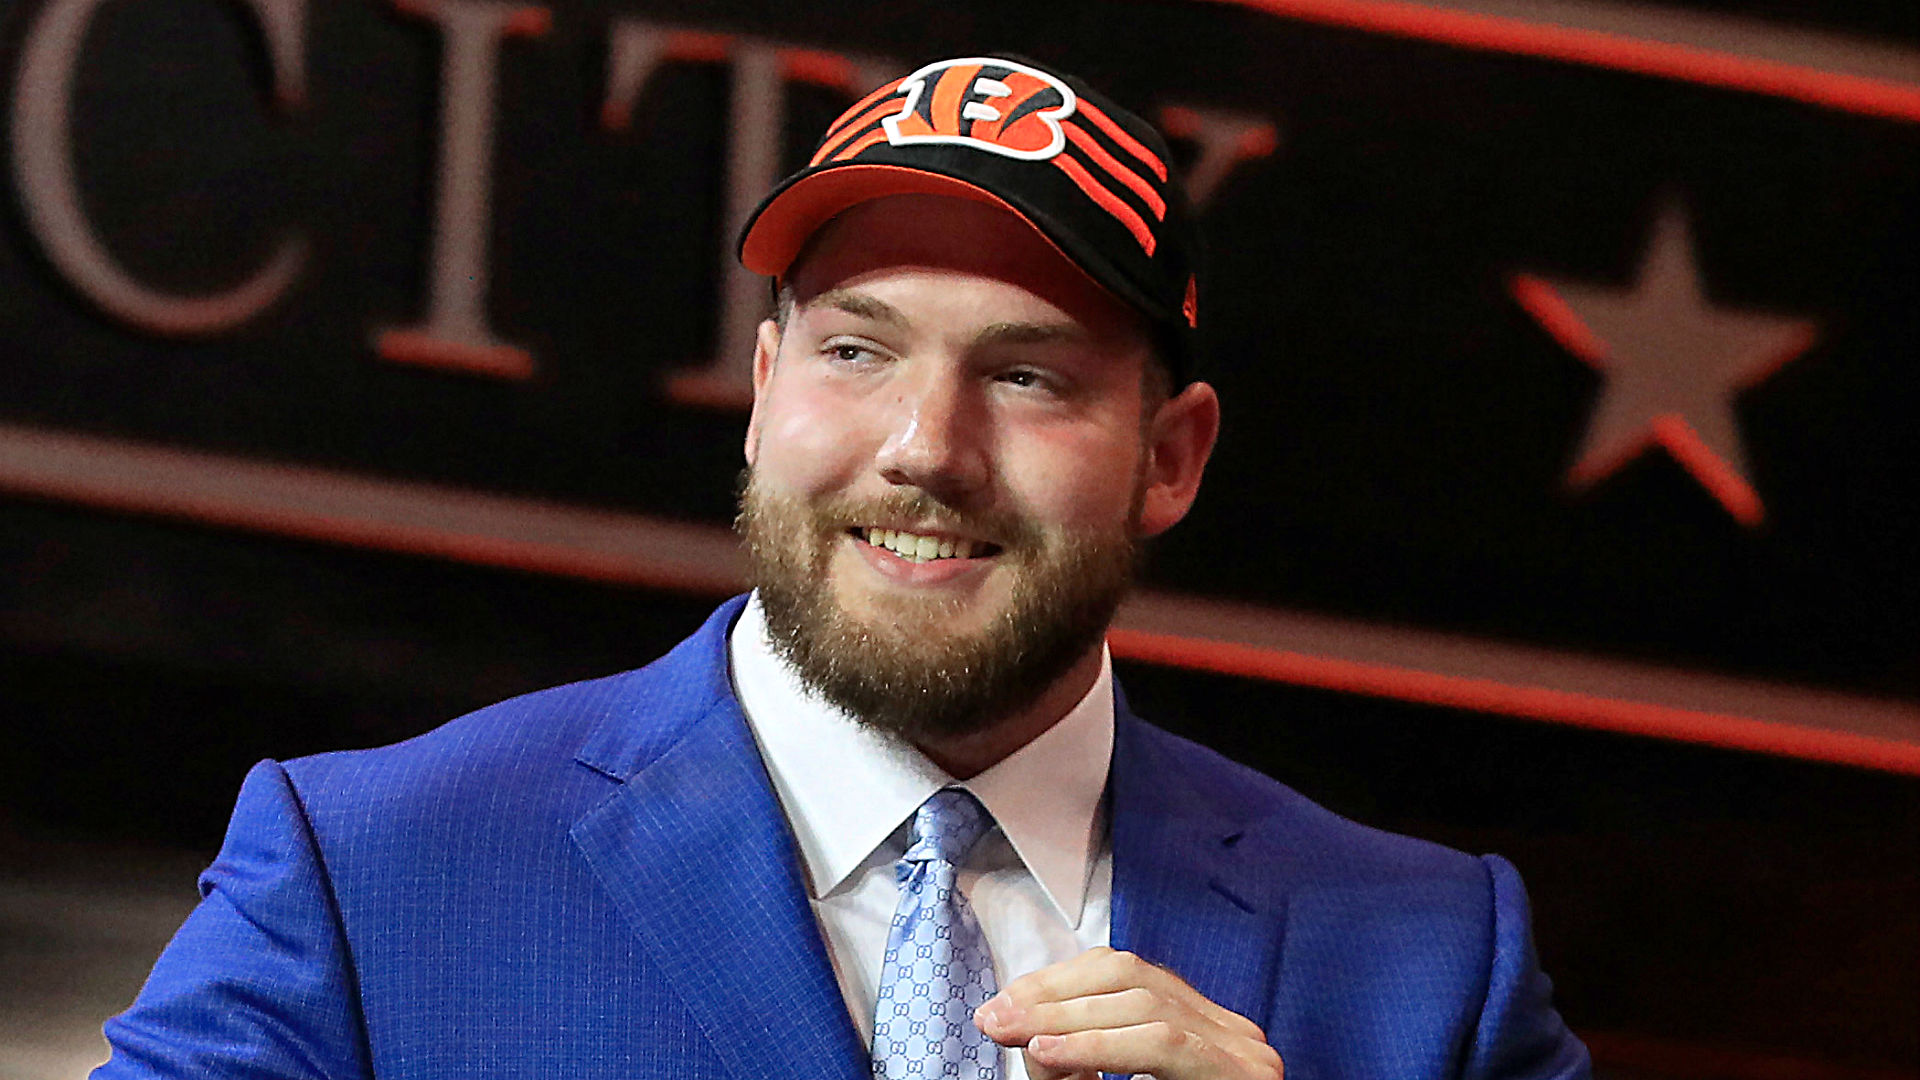 Jonah Williams was a first-round draft pick for the Cincinnati Bengals, but he looks set to miss the 2019 NFL season due to injury.